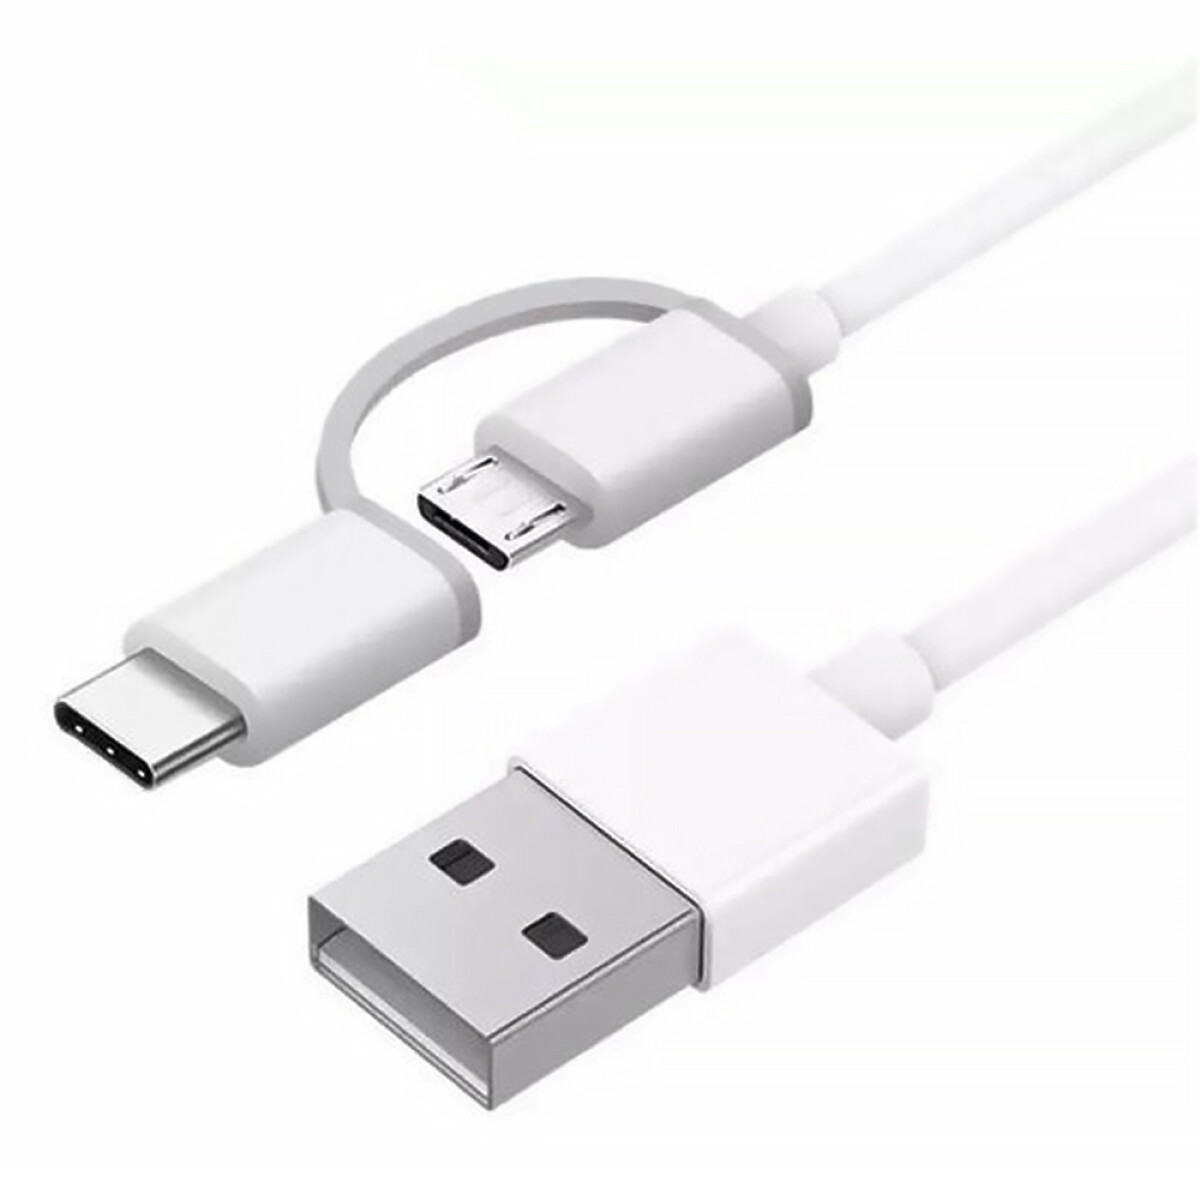 CABLE 2-IN-1 MICRO USB TO USB C 1M - Blanca 